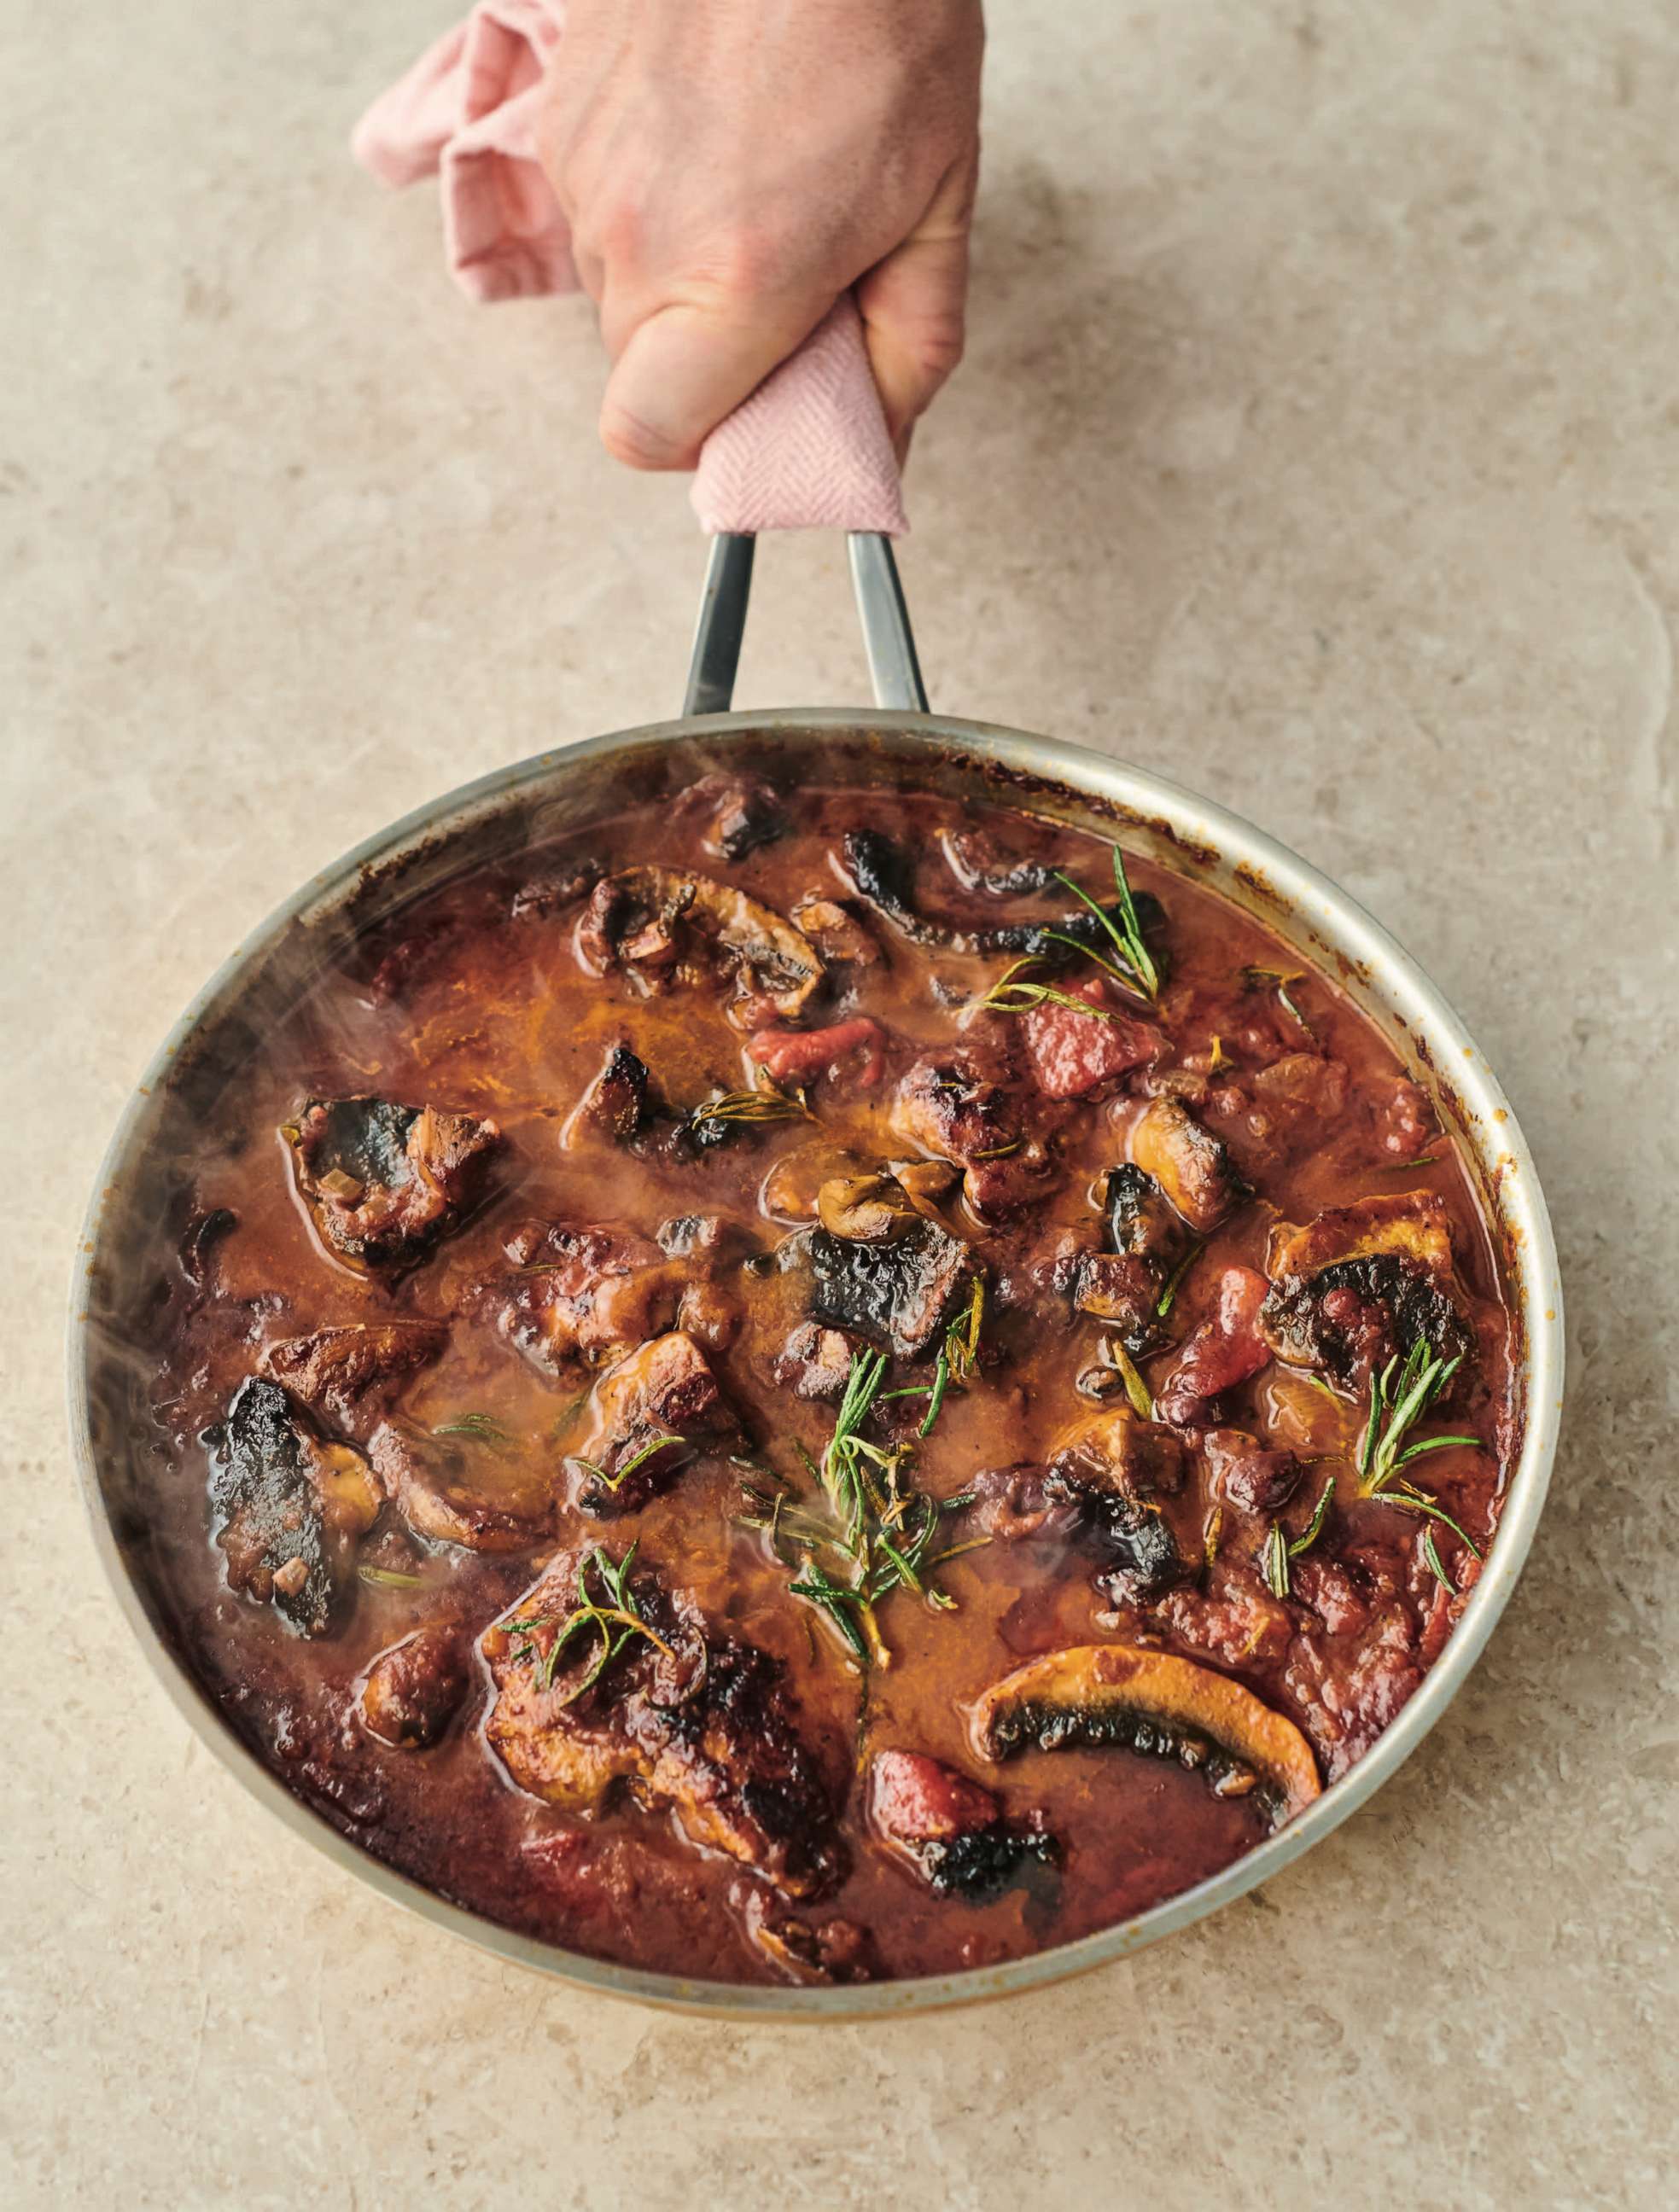 PHOTO: Mushroom and chicken cacciatore from Jamie Oliver's latest cookbook, "7 Ways: Easy Ideas for Every Day of the Week."